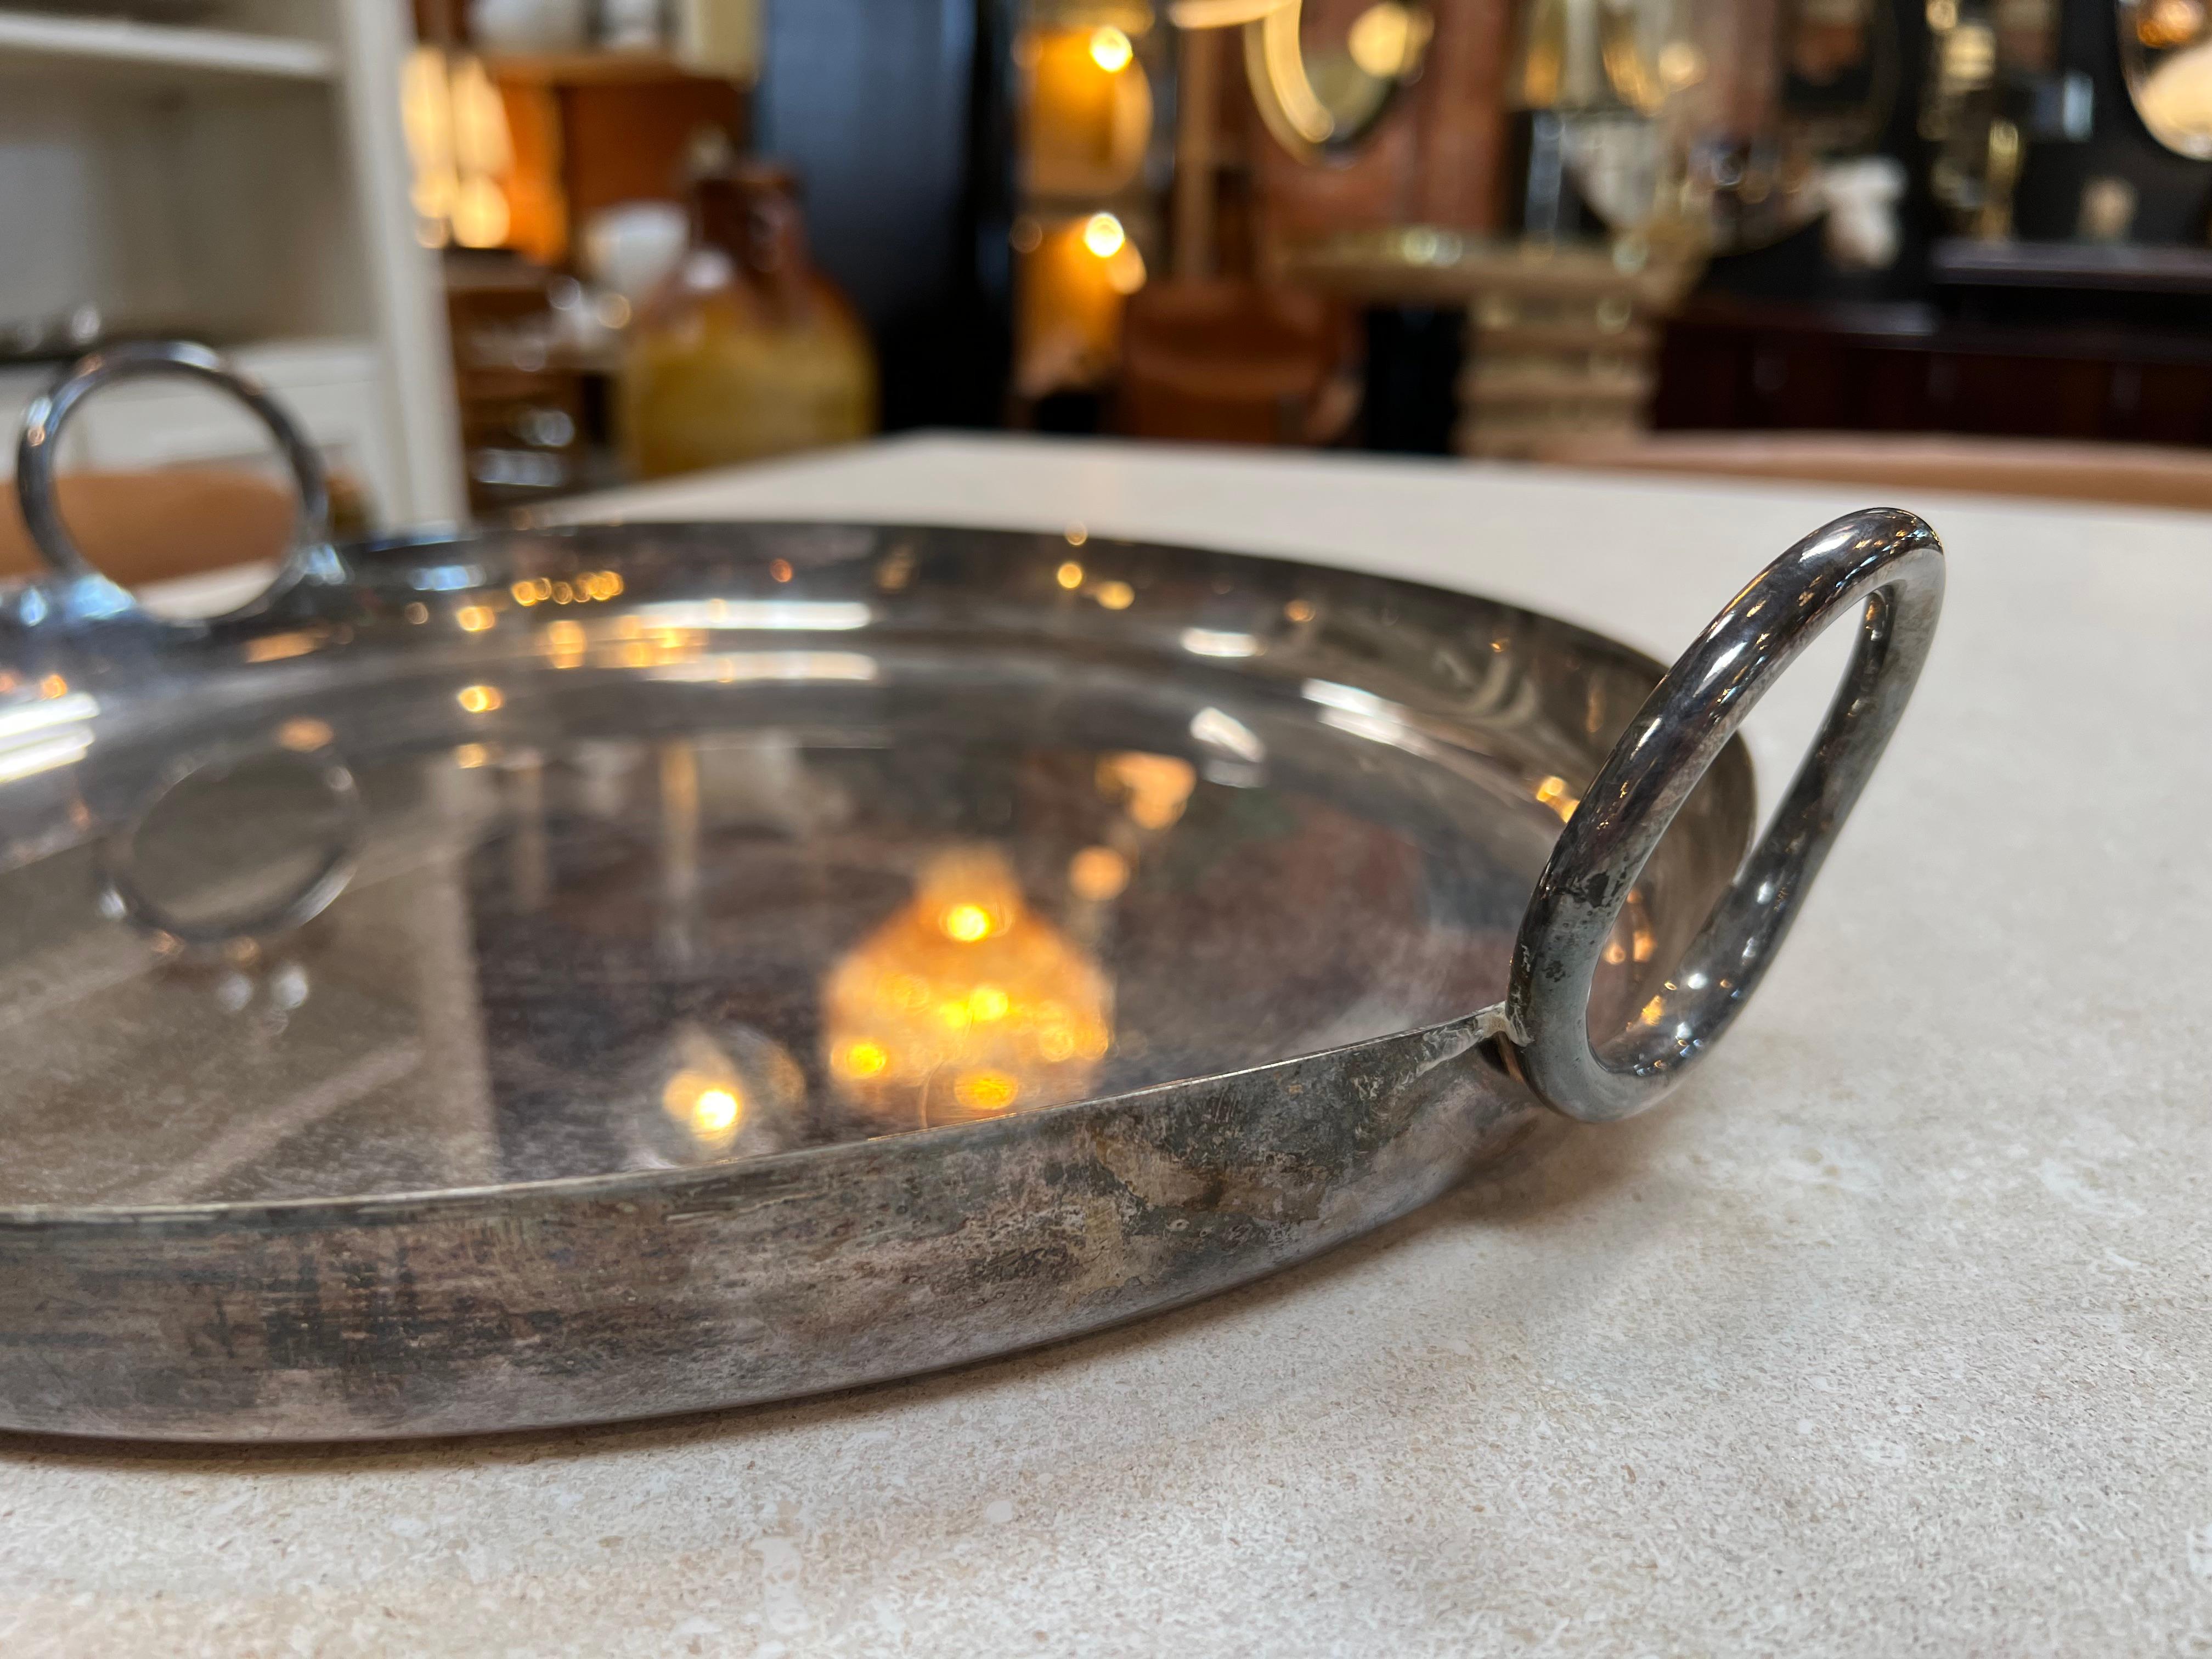 The Mid Century Italian Silver Plated Round Bowl from the 1970s exudes timeless elegance with its sleek design and lustrous silver-plated finish, representing the epitome of Italian craftsmanship during that era.

